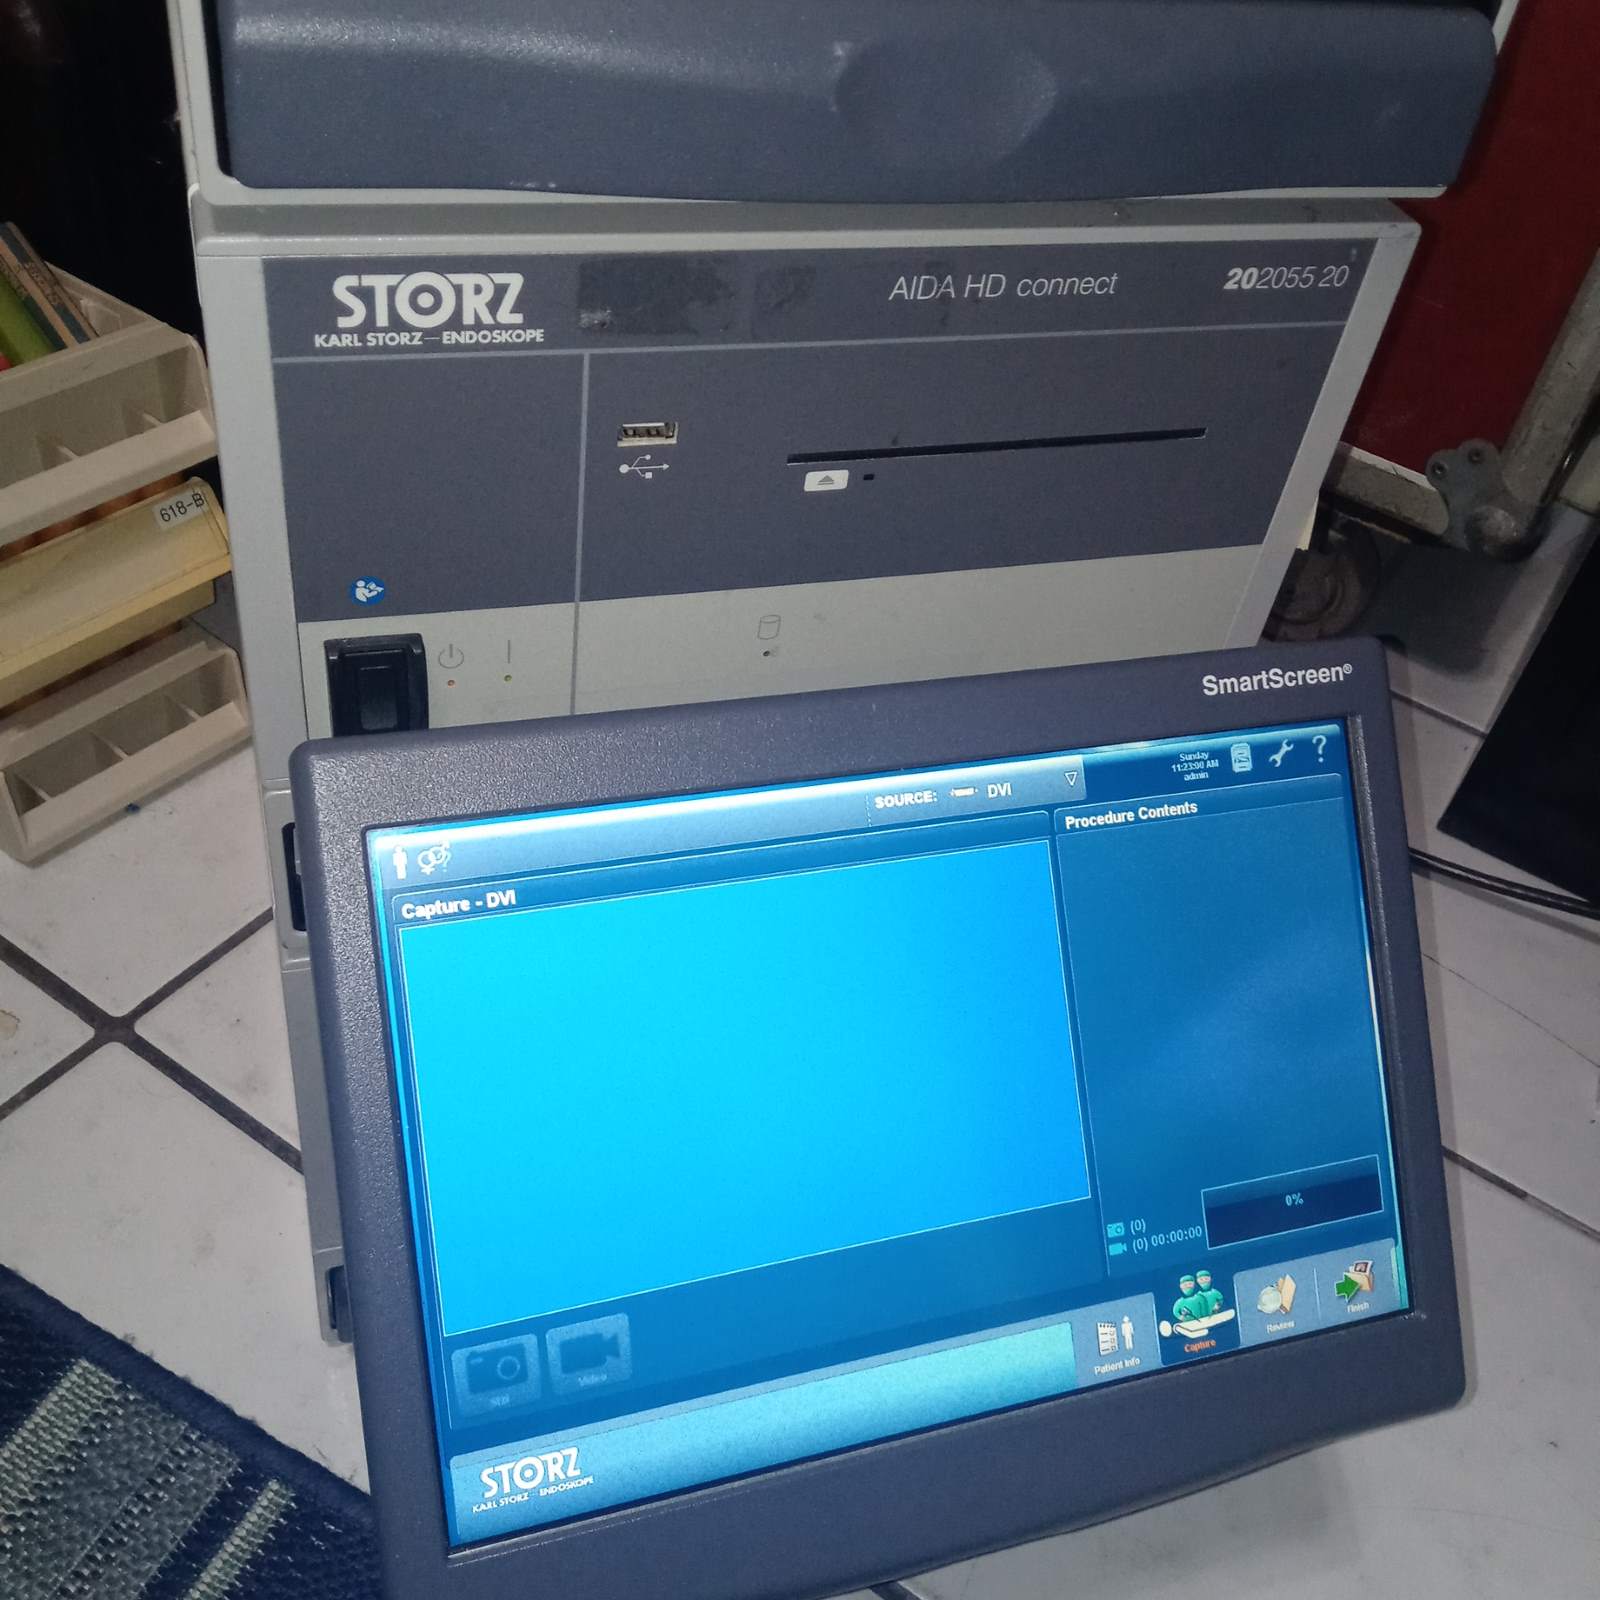 refurbished Aida video and image capture system storz aida capture system video images files usb dvd blu ray recorder touch screen computer